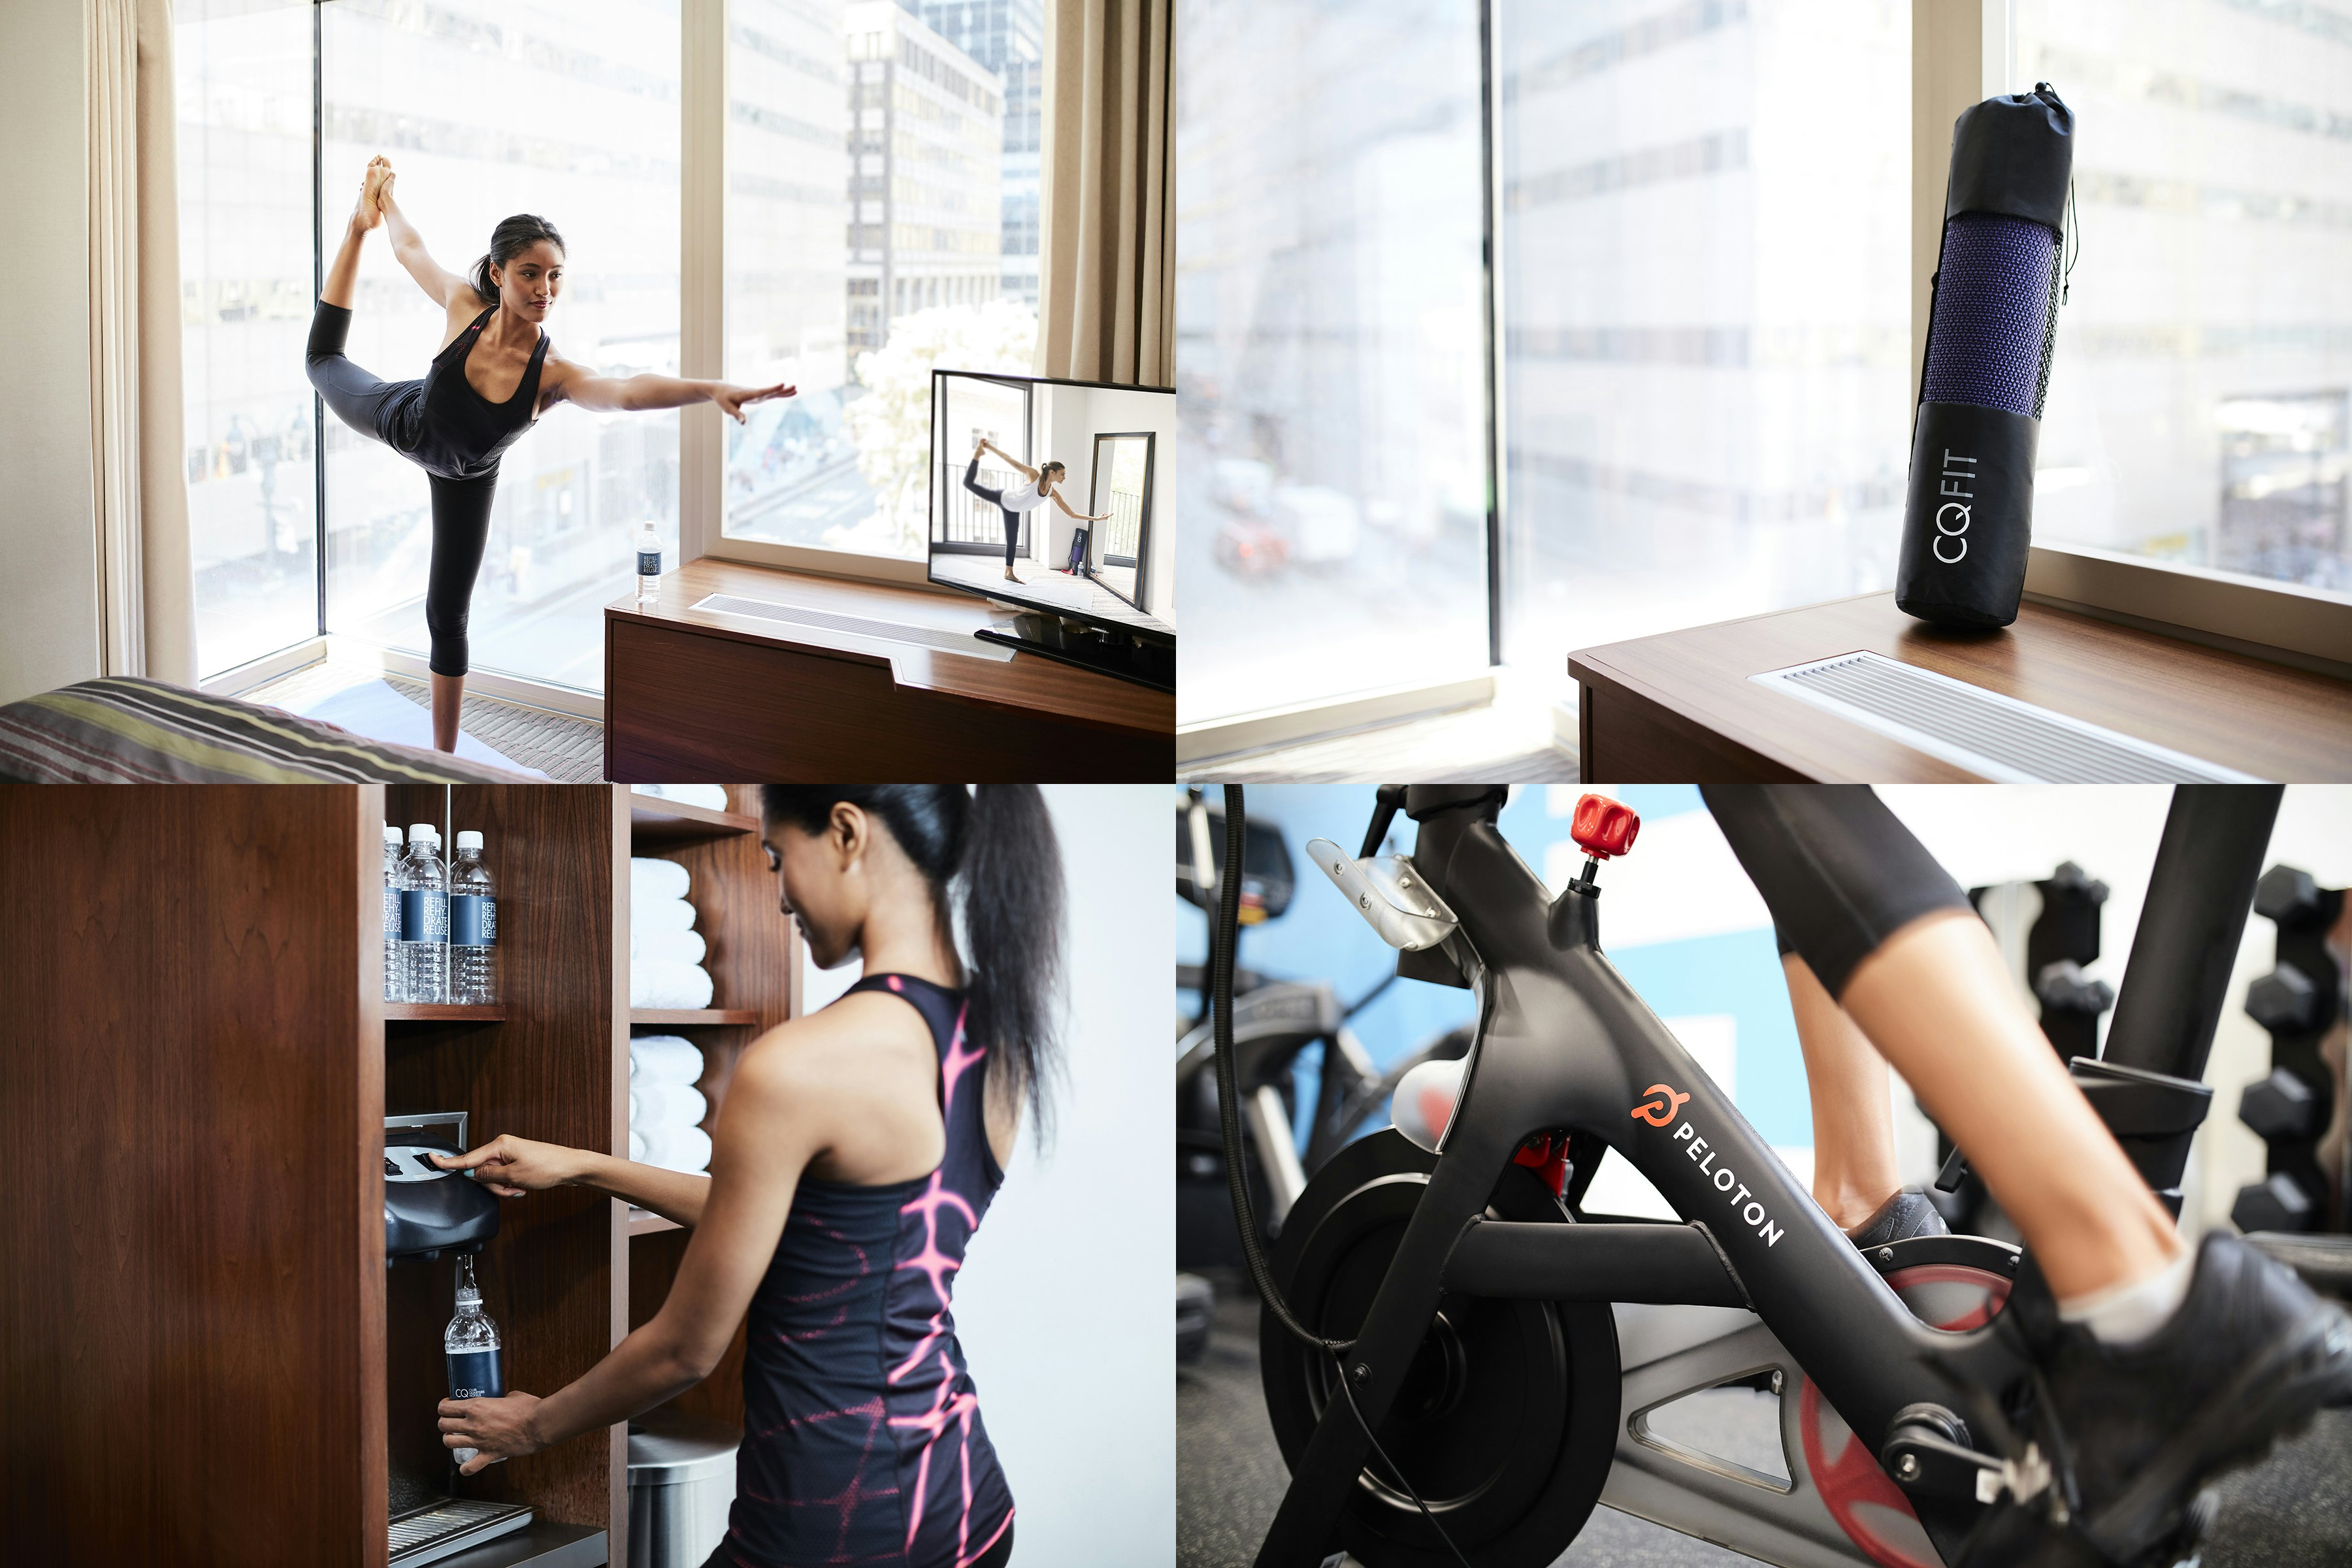 Sweat It Out with CQ Fit - Club Quarters Hotels - Yoga, Peloton and more